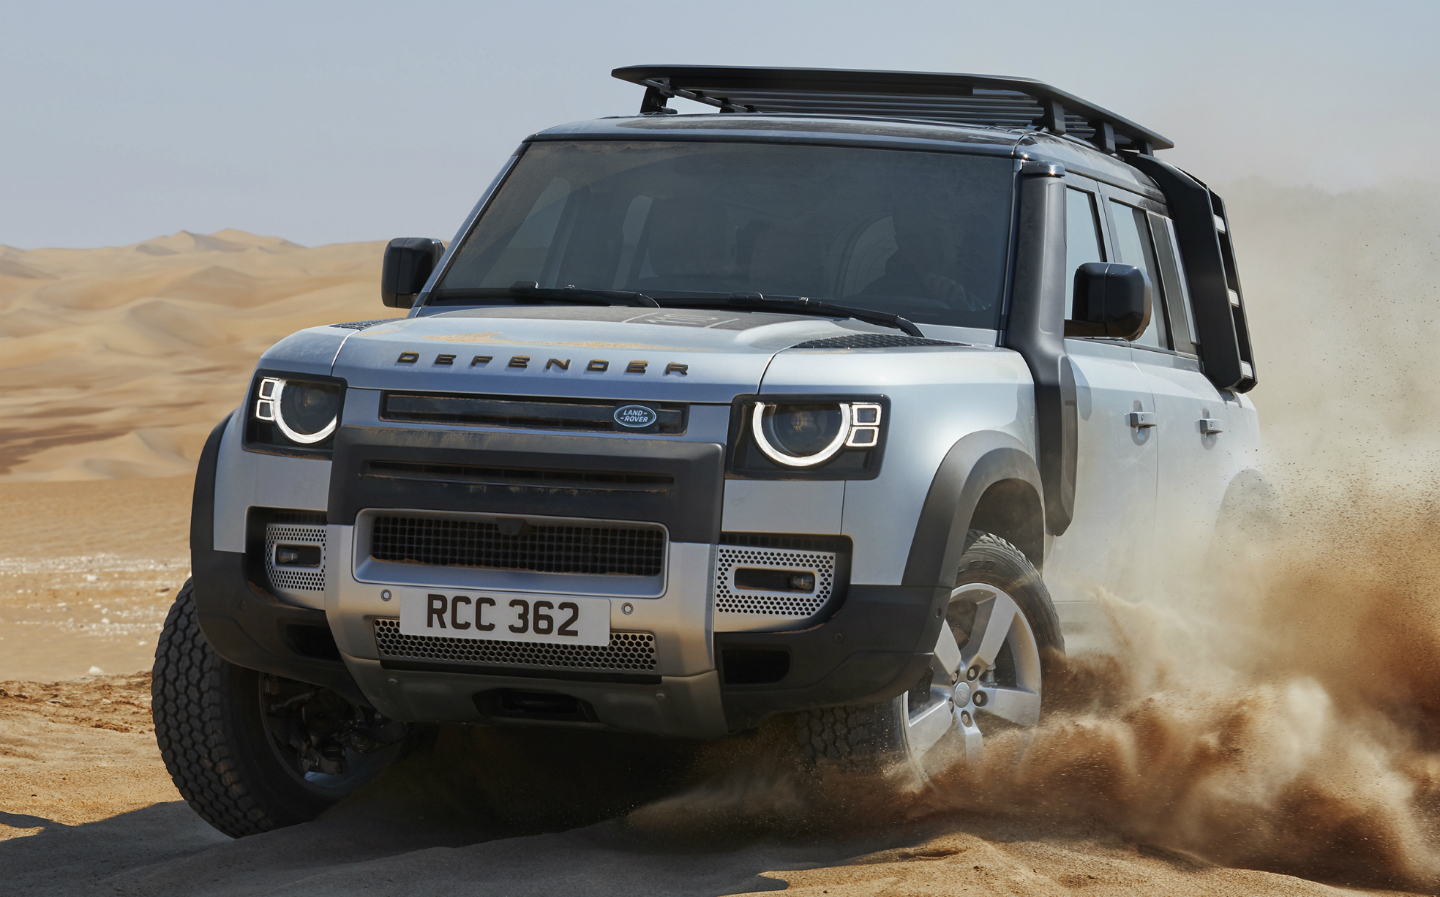 The best new cars coming in 2020 Land Rover Defender 110